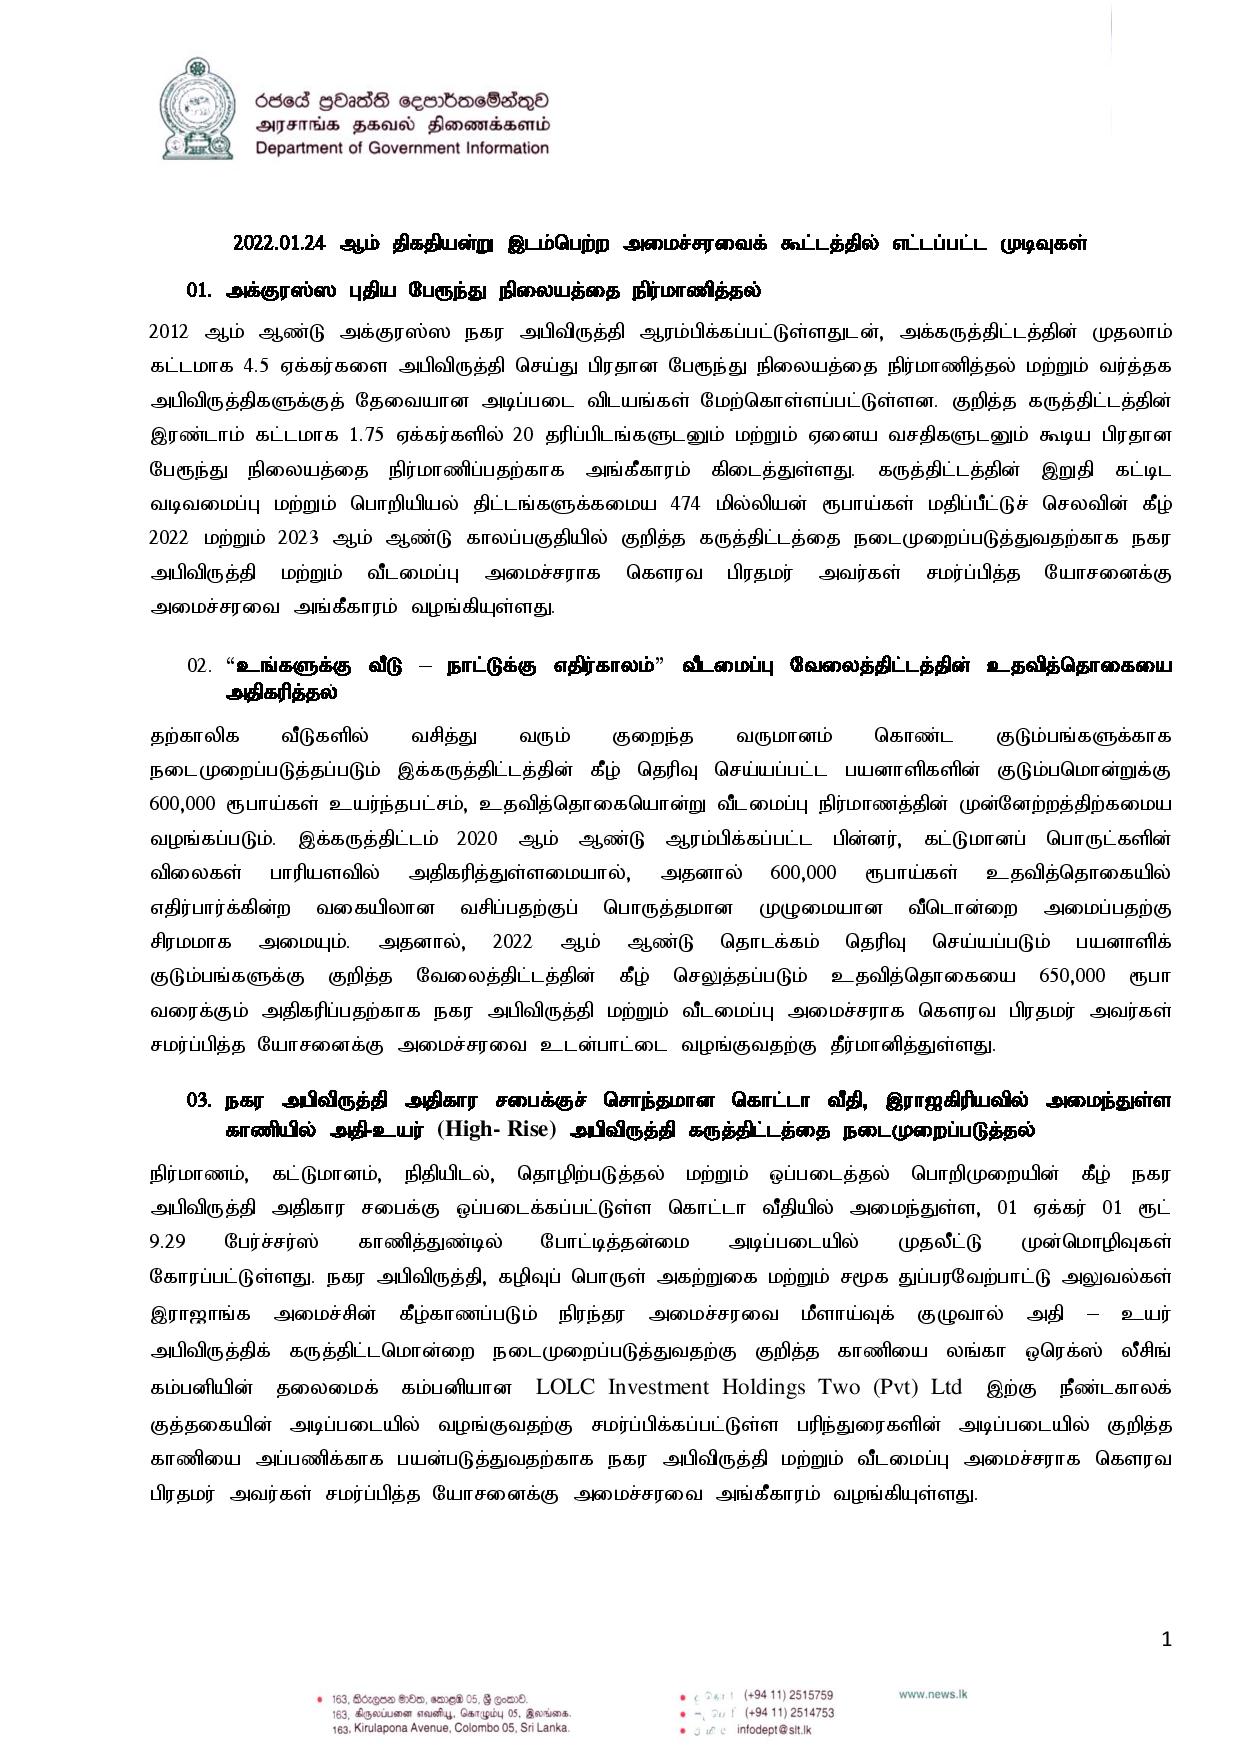 Cabinet Decisions on 24.01.2022 Tamil page 001 1